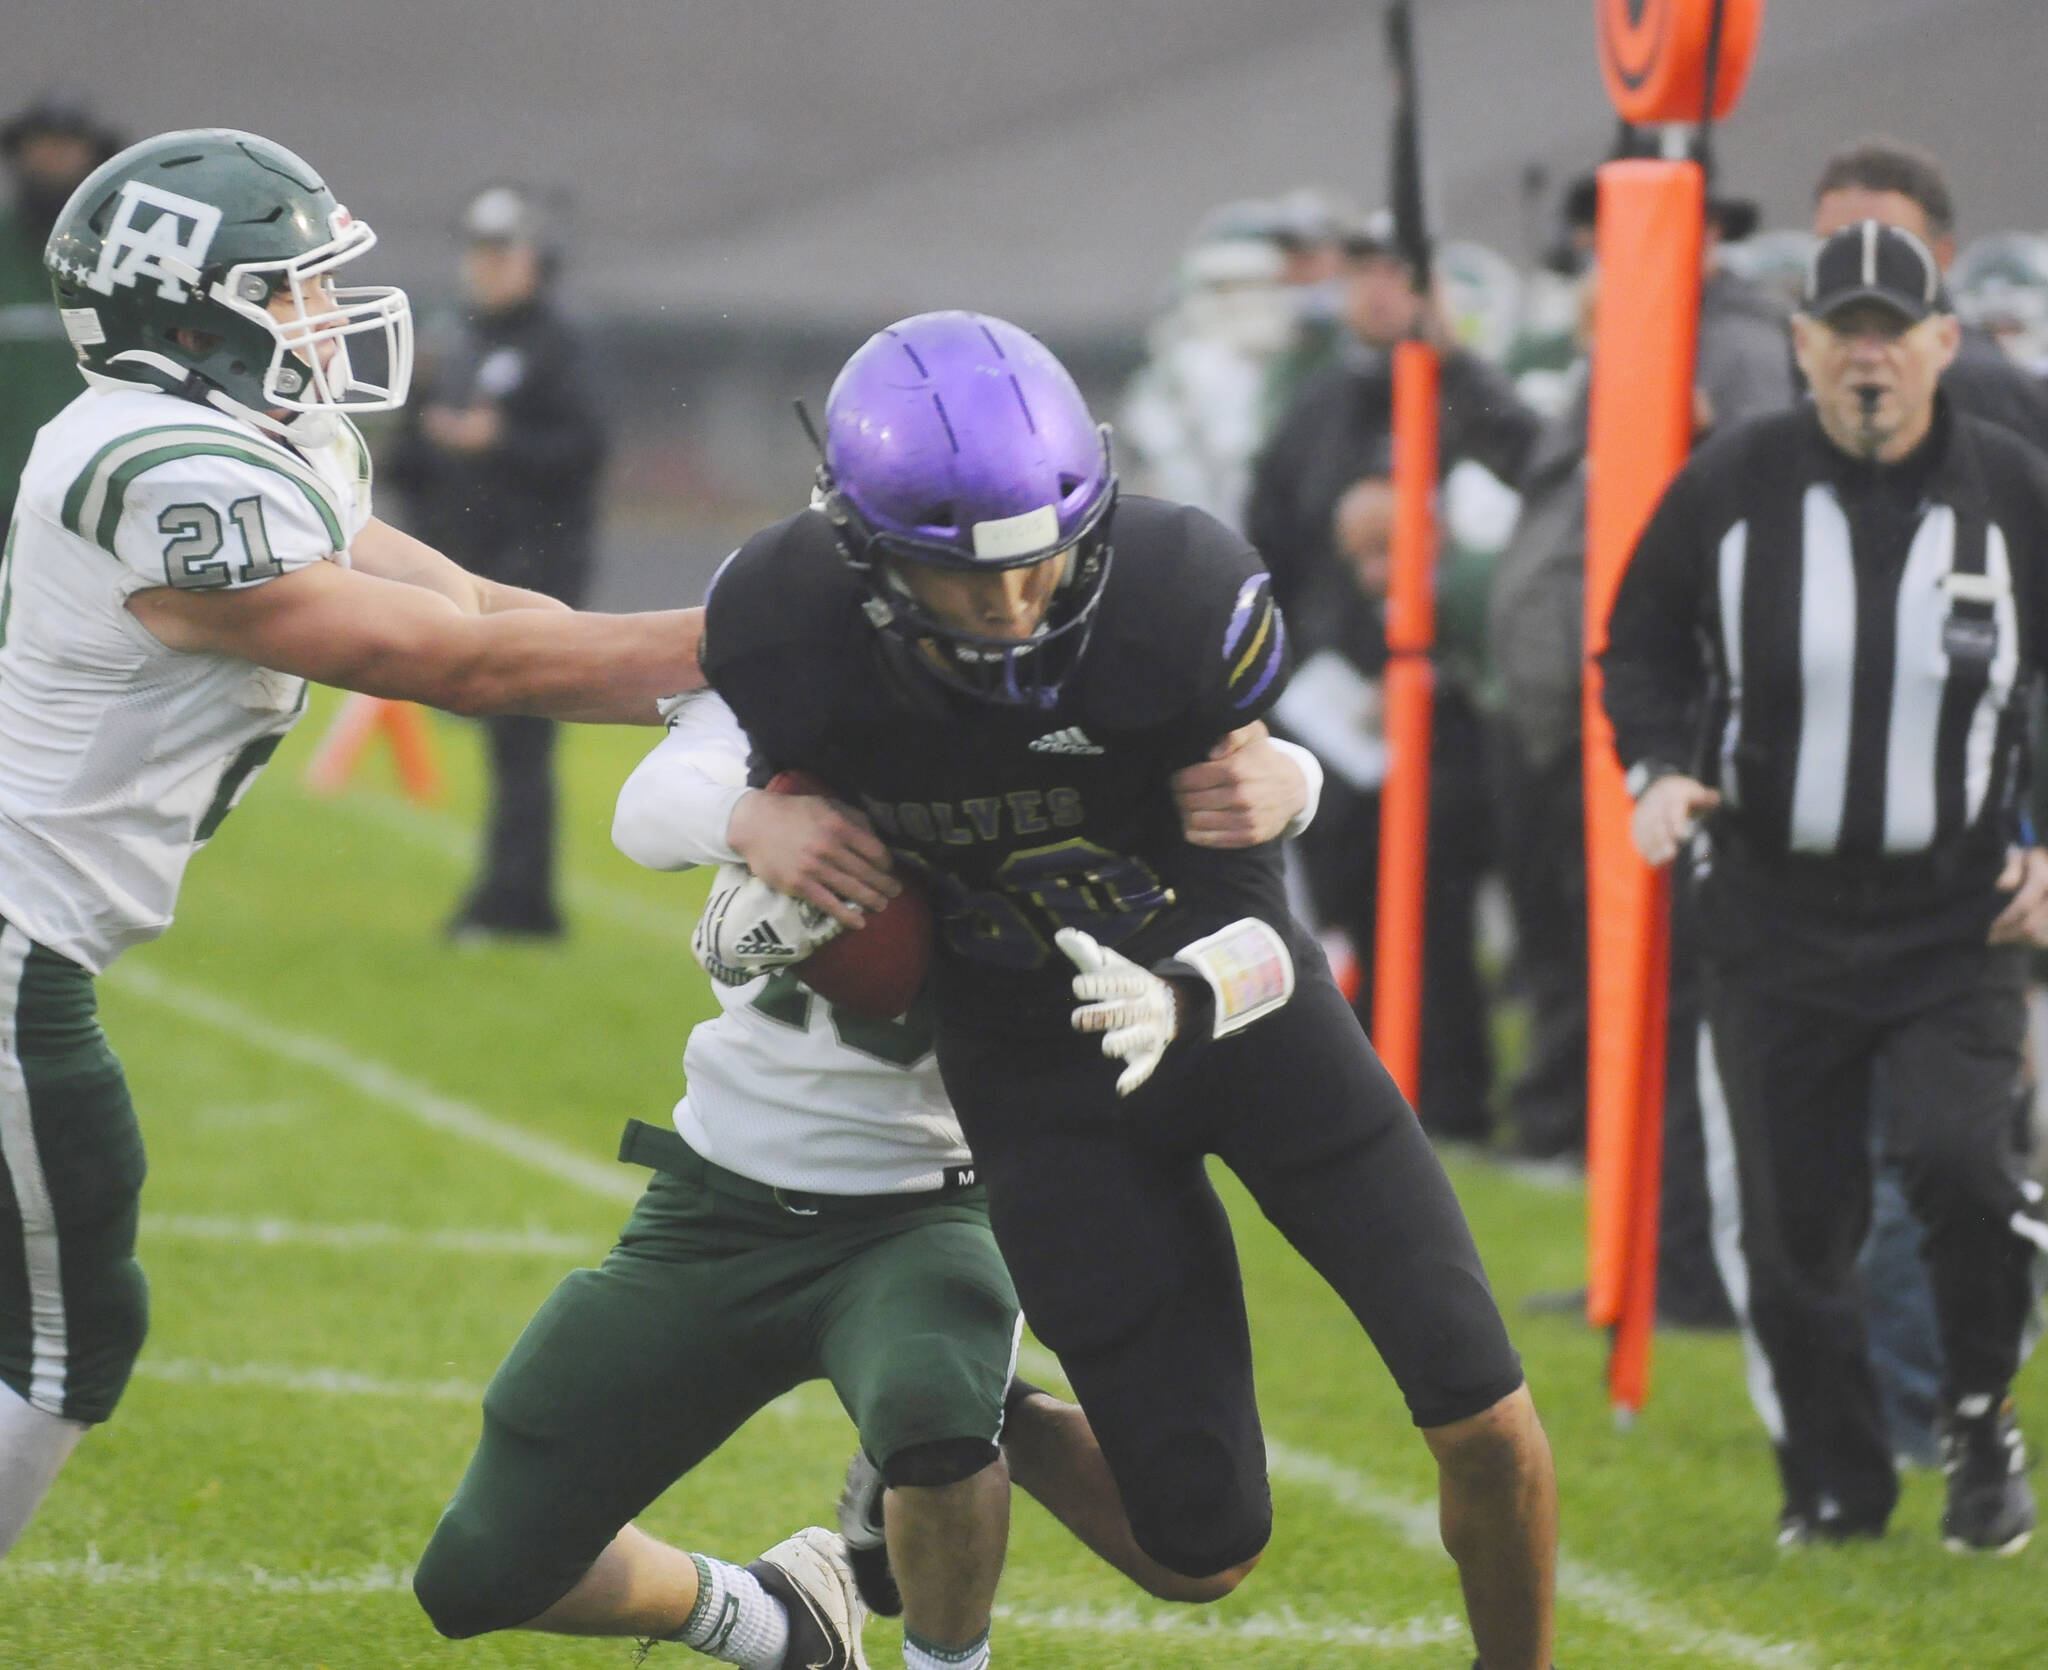 Michael Dashiell/Olympic Peninsula News Group
Sequim's Isaiah Moore adds run-after-catch yardage while Port Angeles' defenders including Daniel Cable, left, attempt to haul him down during Friday's Rainshadow Rumble rivalry game.